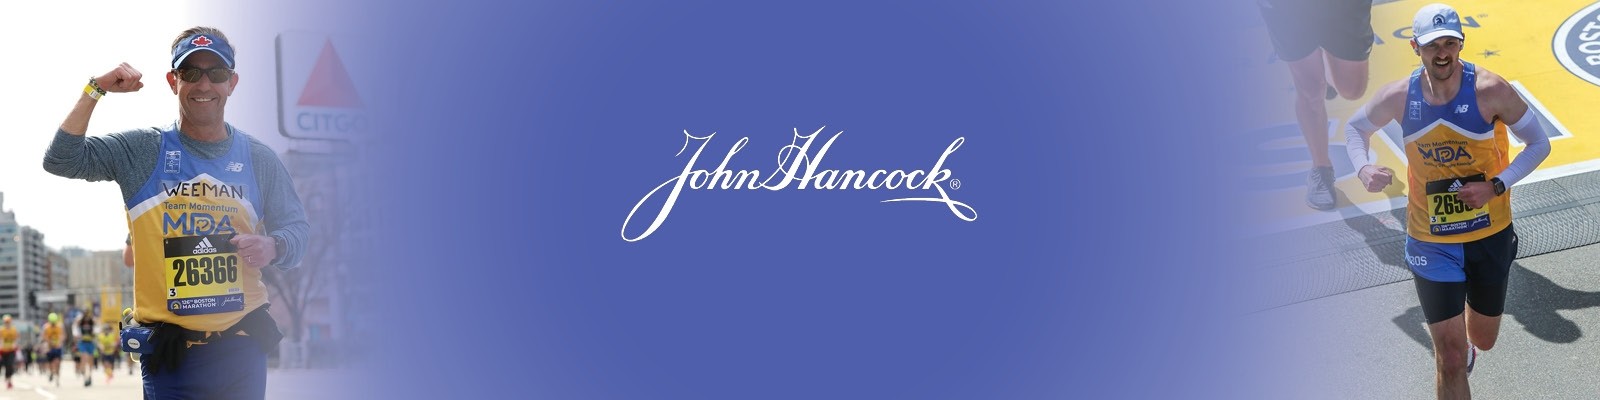 Banner with John Hancock logo and two runners